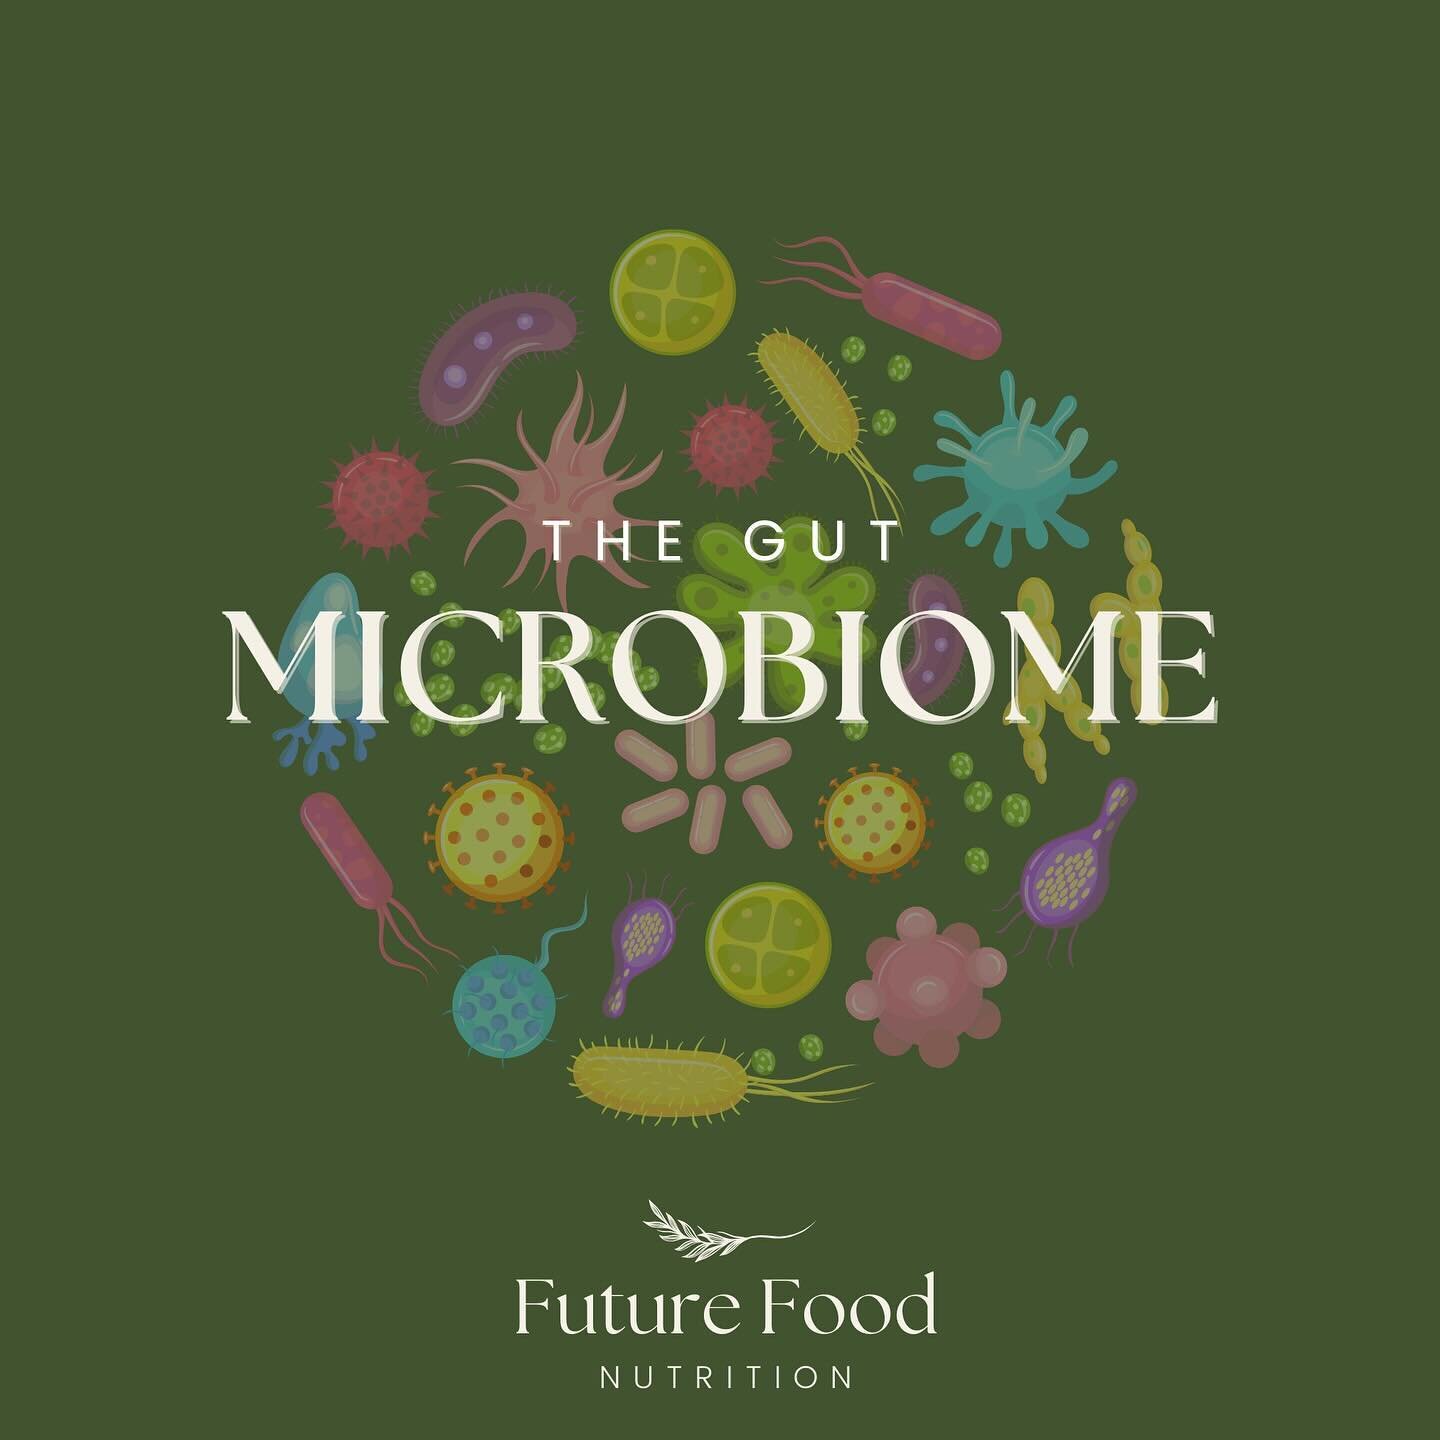 🔅 The Gut Microbiome 🔅

Microbiomes are communities of microorganisms, including bacteria, fungi, viruses and other single-celled organisms, that live on and inside our bodies. The largest and most diverse microbiome is in the large intestine, but 